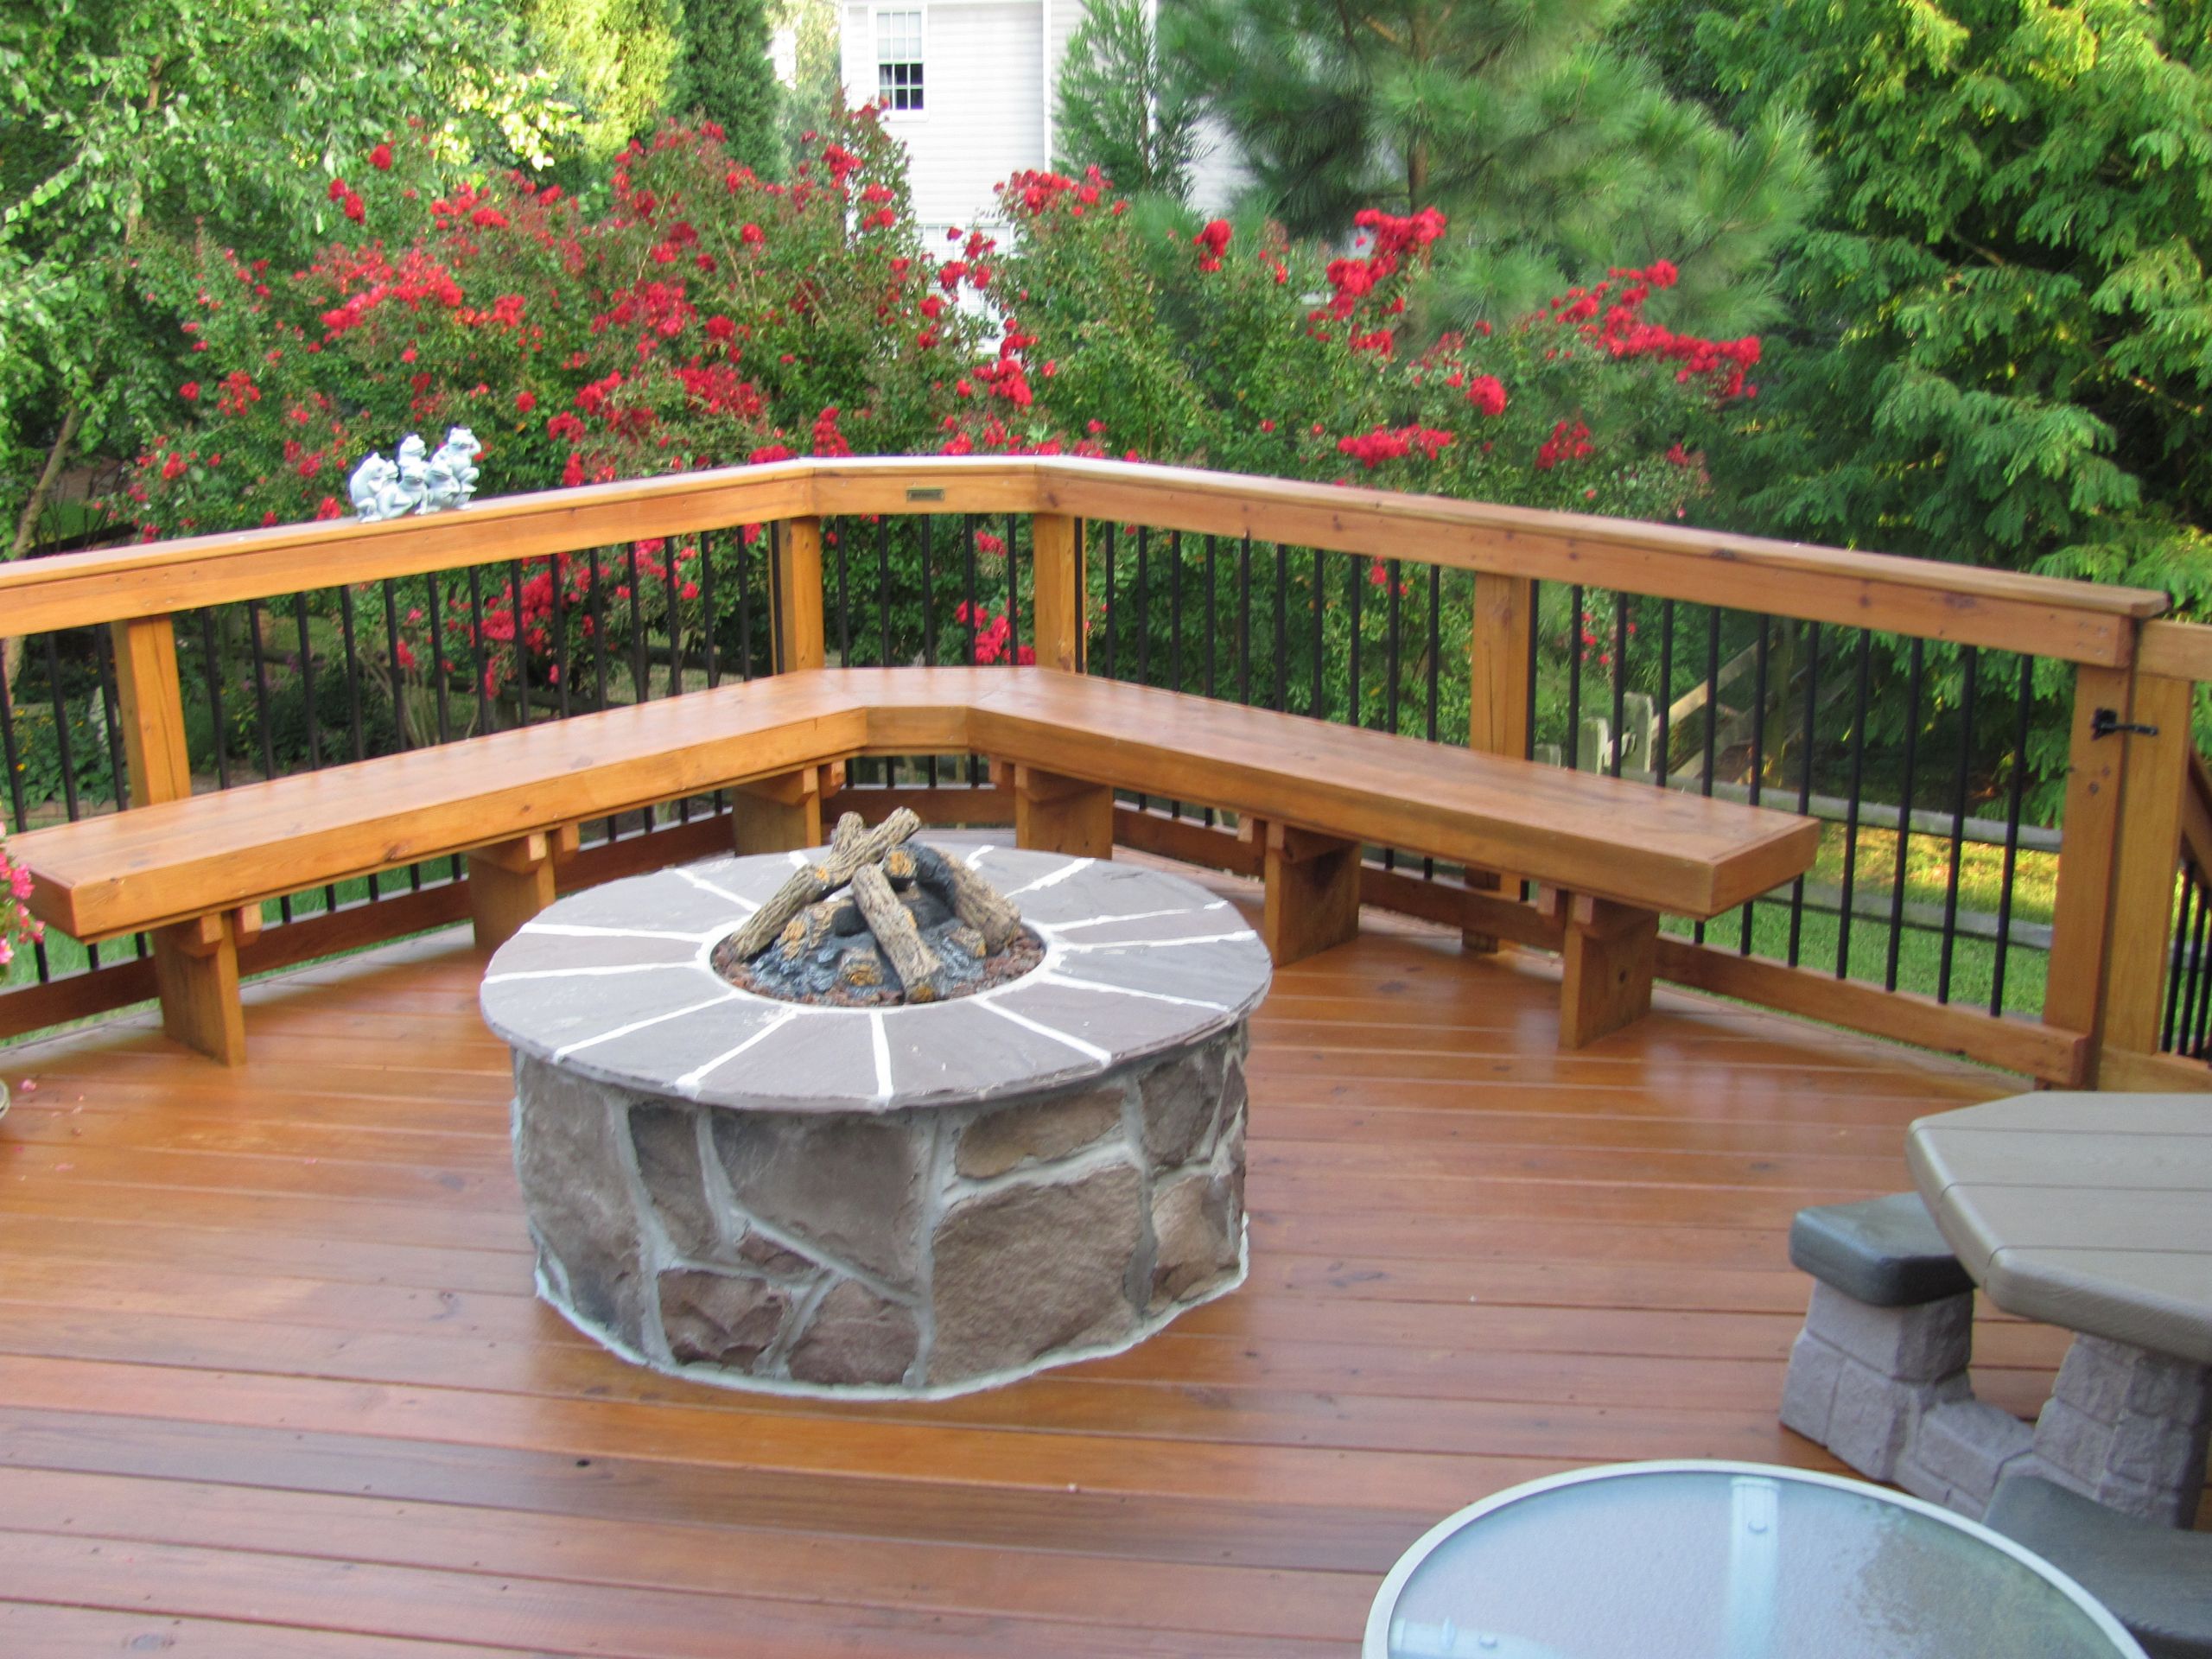 Fire Pit For Wood Deck
 Archadeck deck in Charlotte with fire pit